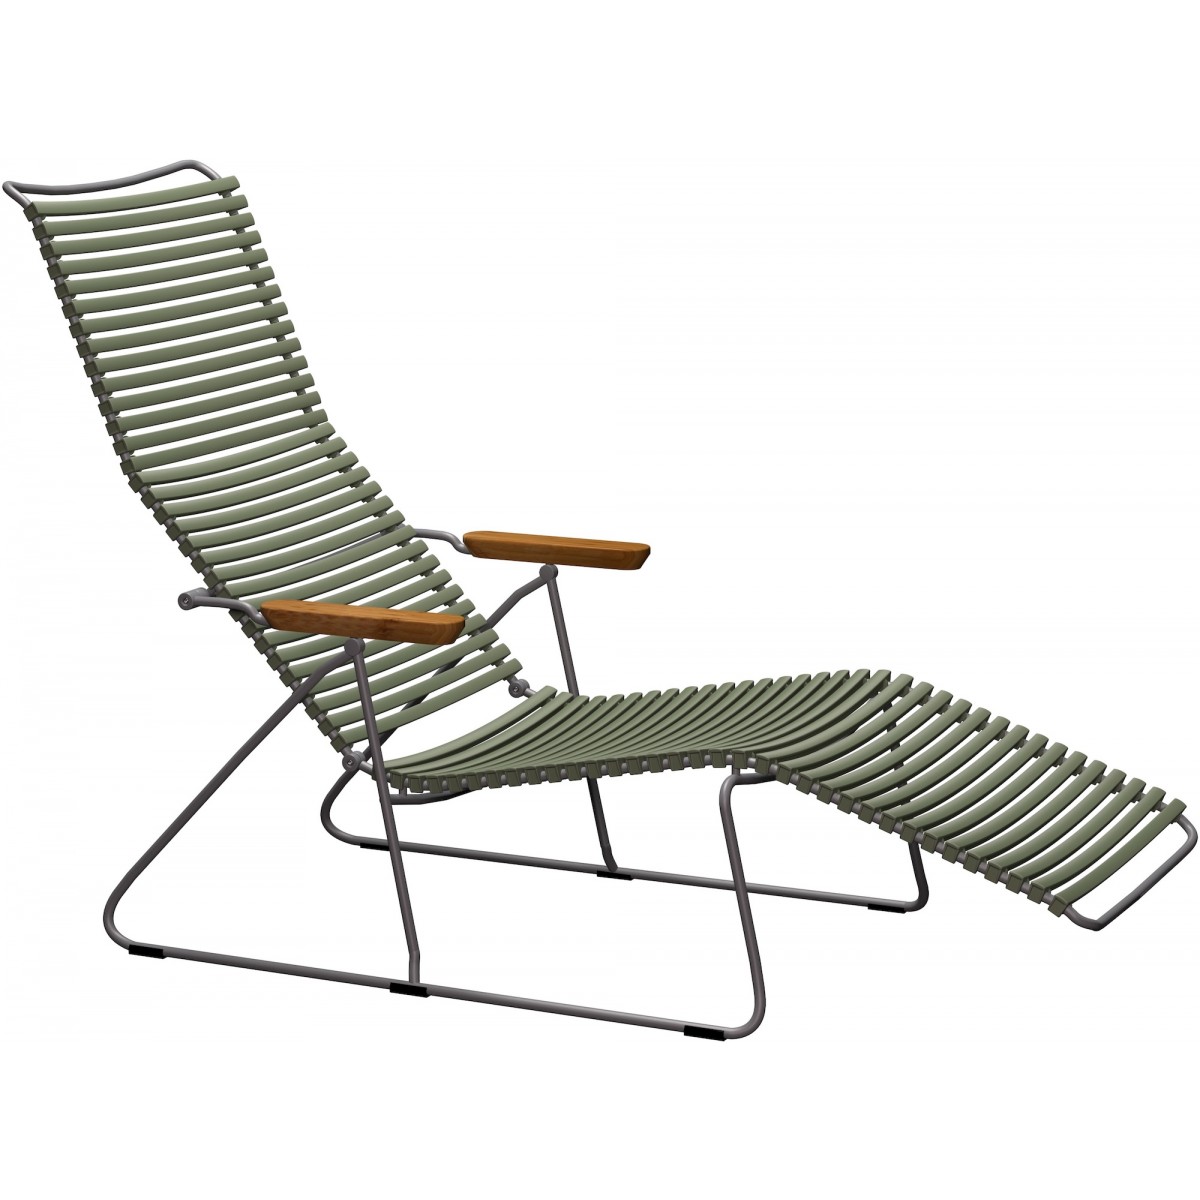 Olive green (71) - Sunlounger Click